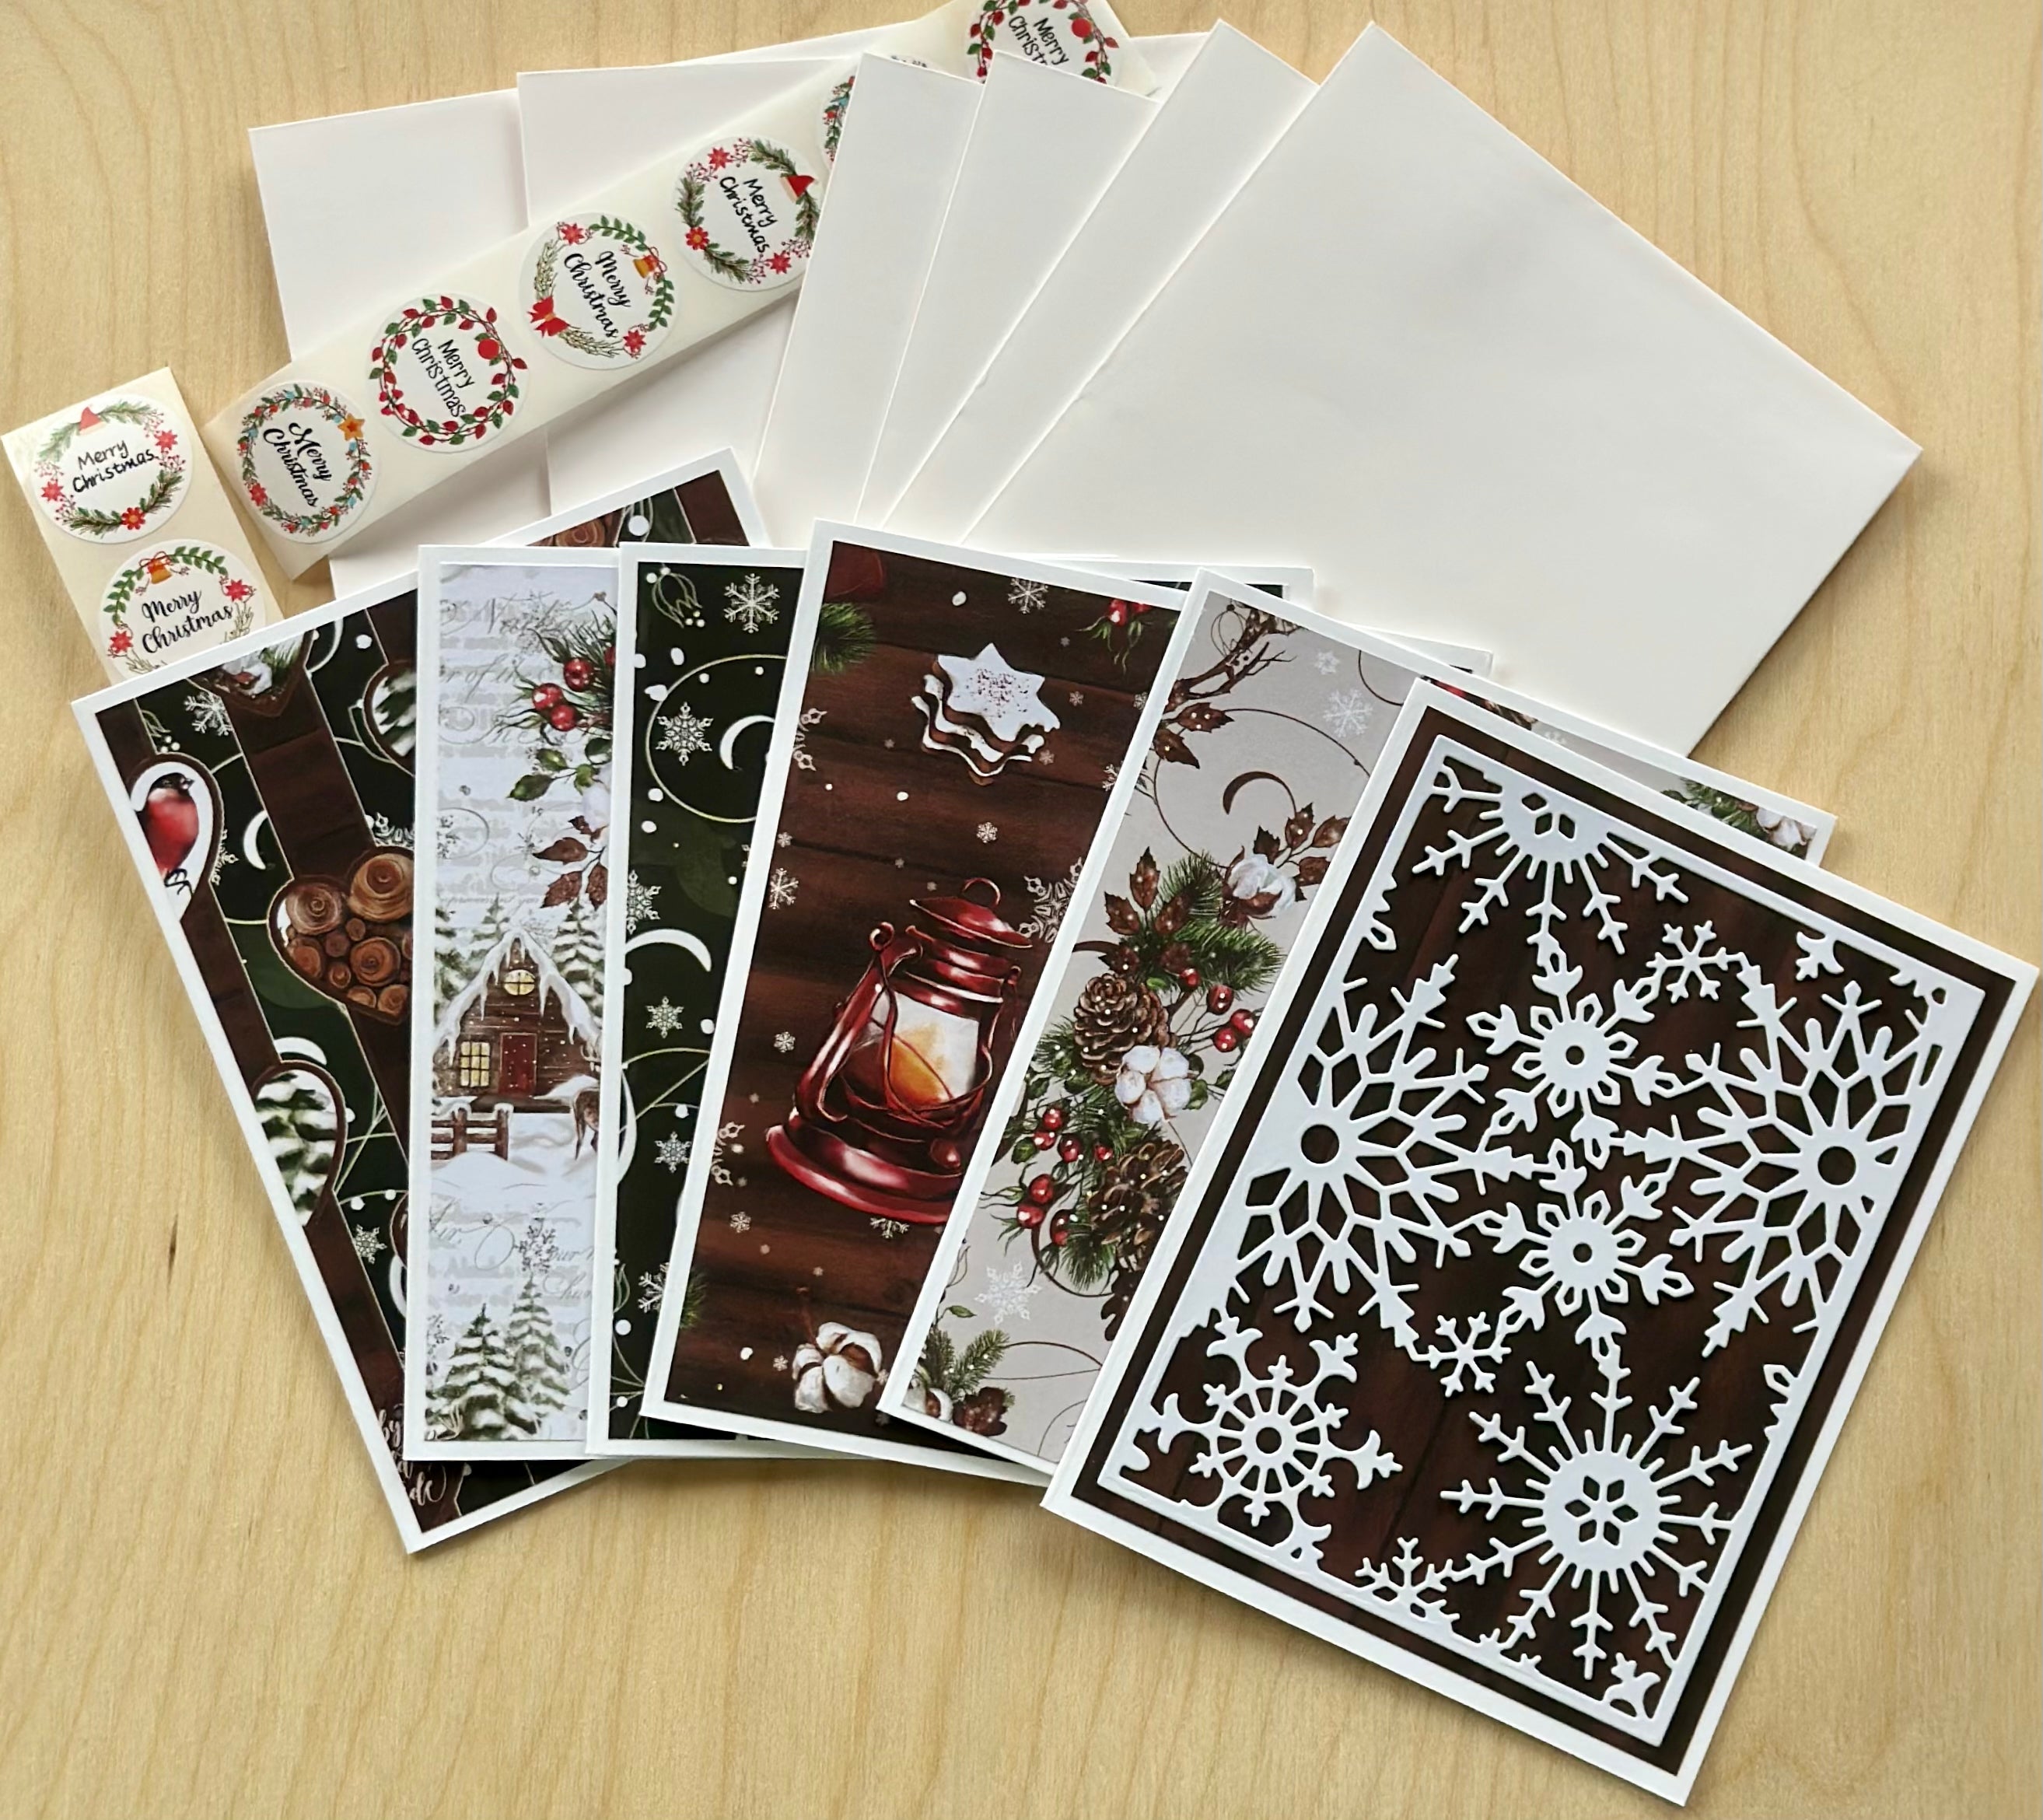 Christmas Cards | Embossed Christmas Cards | Blank Christmas Cards | Greeting Cards | Holiday Cards | Handmade Cards Sets | Cards Sets